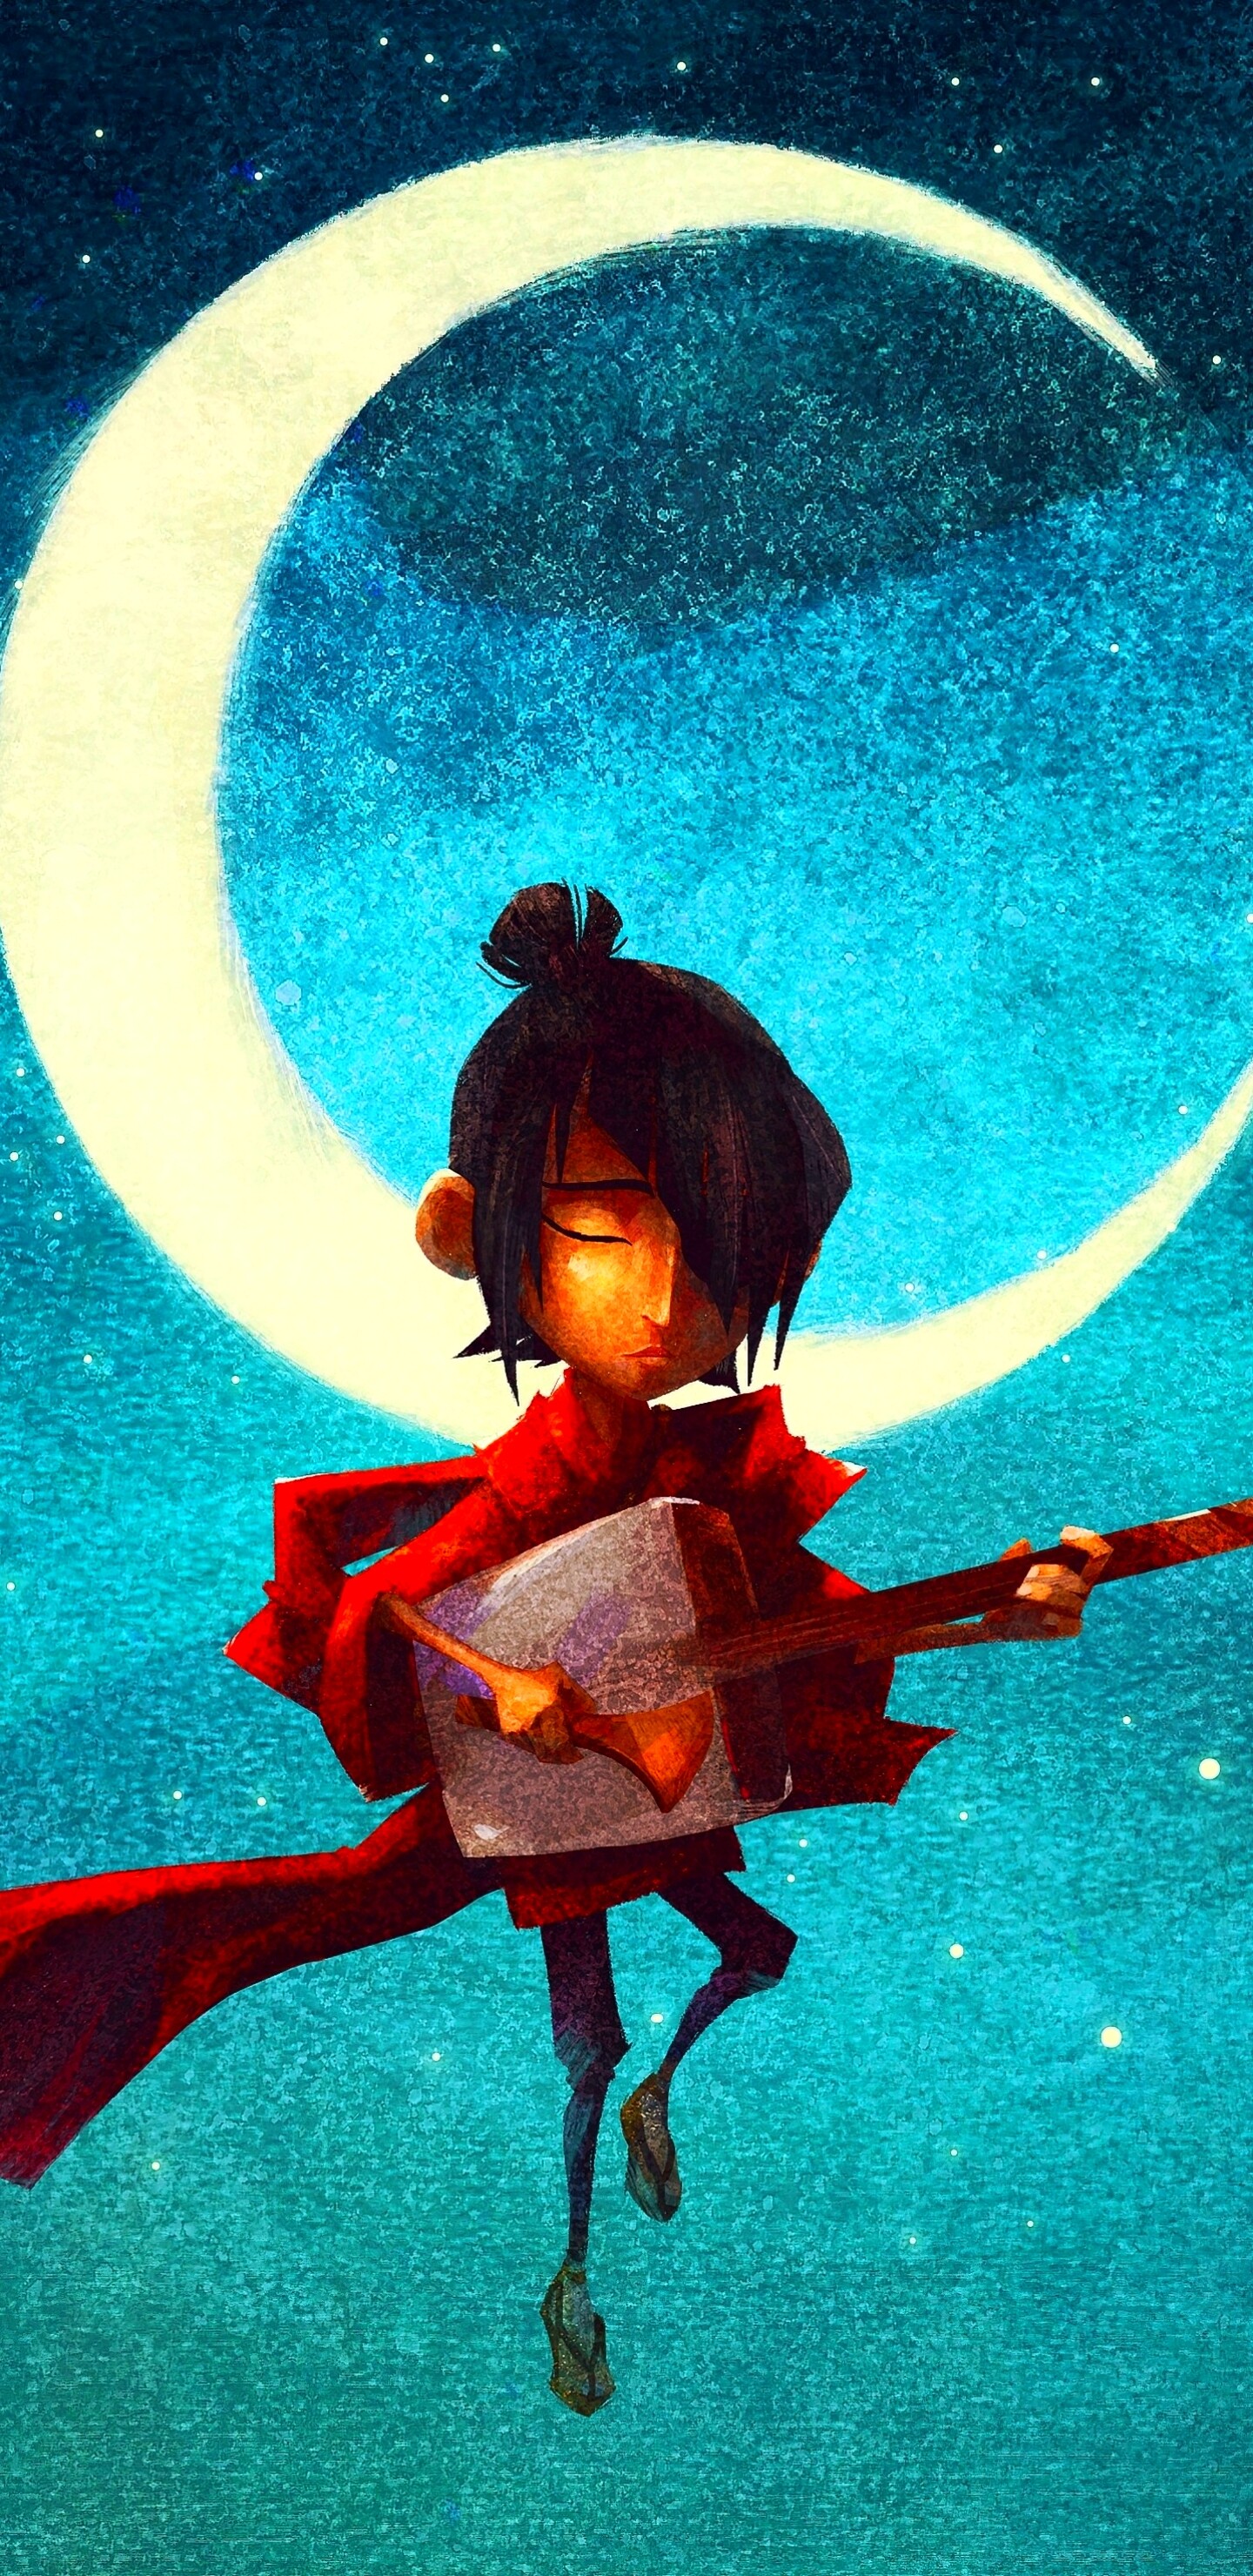 Kubo and the Two Strings: A young boy who wields a magical shamisen, A Japanese stringed instrument. 1440x2960 HD Wallpaper.